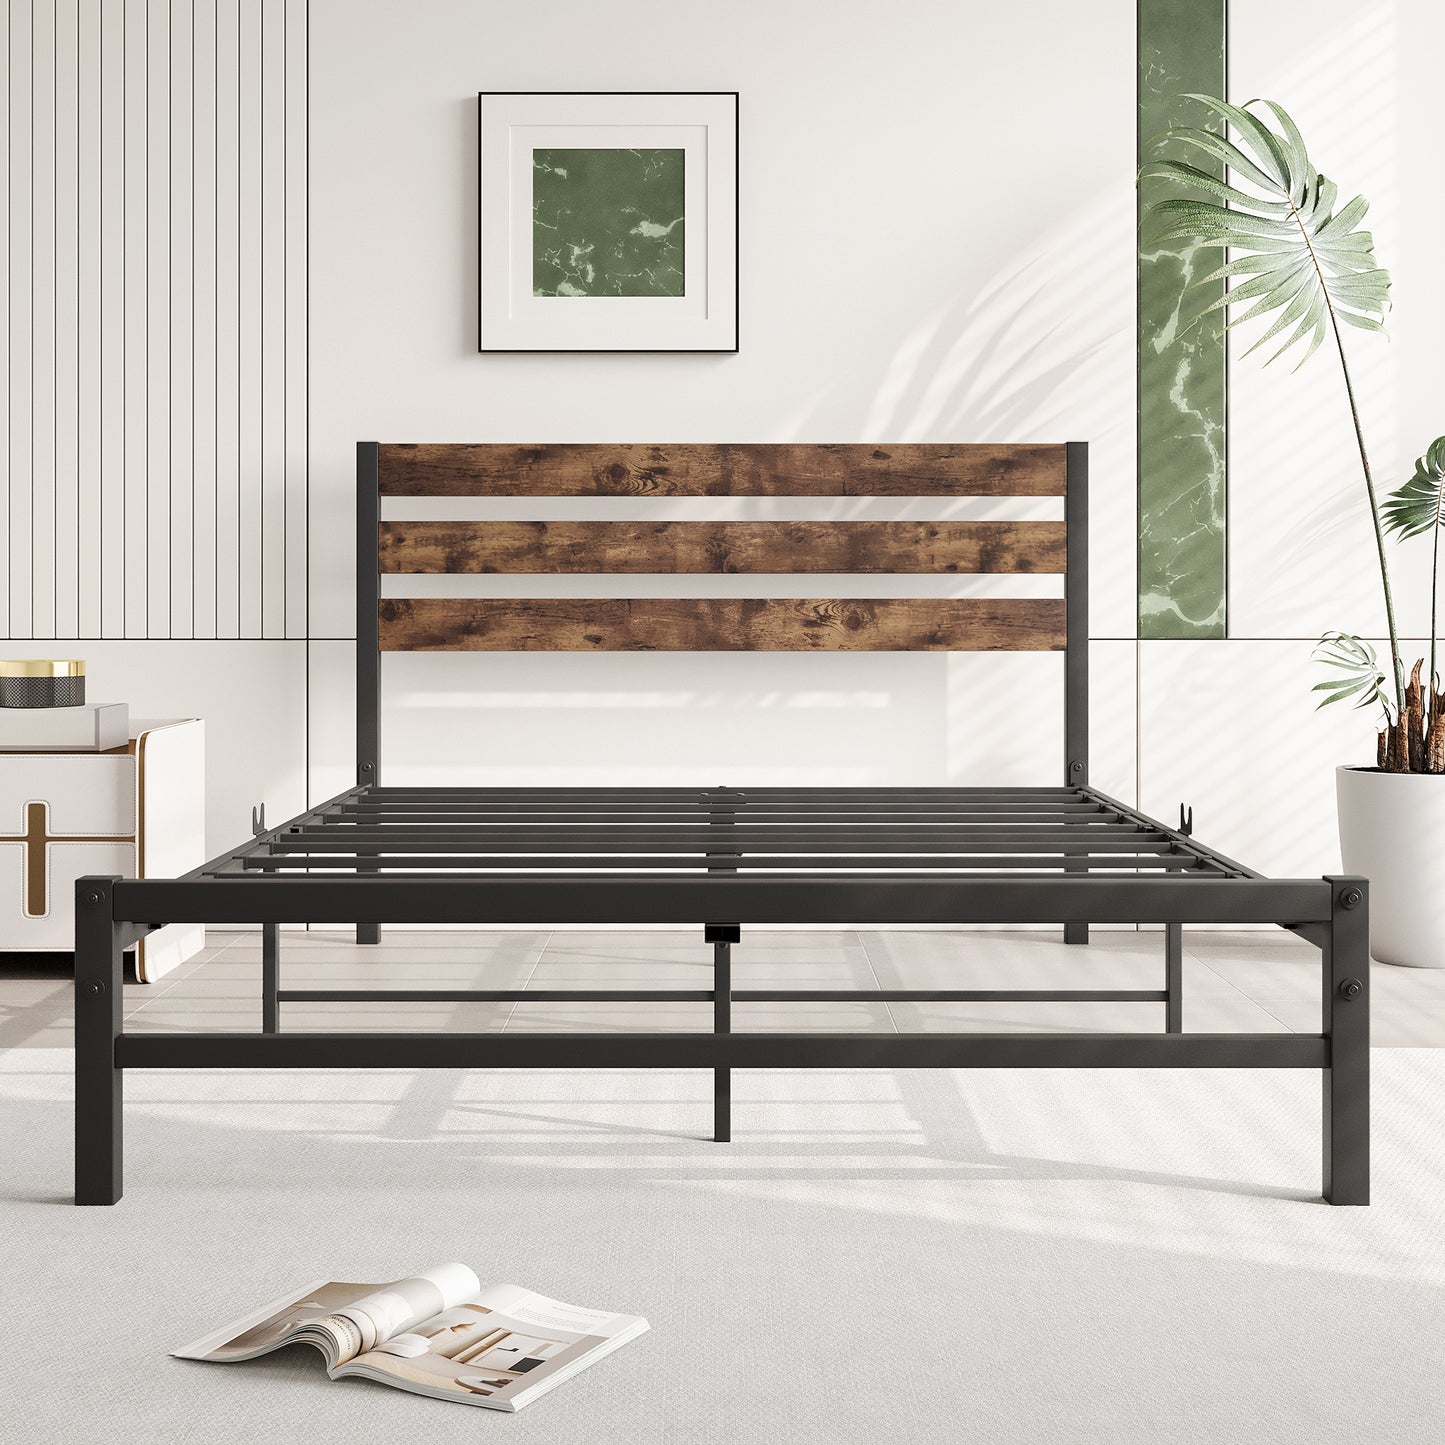 SYNGAR Platform Bed Frame Twin Size with Vintage Wooden Headboard, New Upgraded Metal Legs Support, No Box Spring Needed, Heavy Duty Steel Twin Bed Frame with 300LBS Weight Capacity, Black